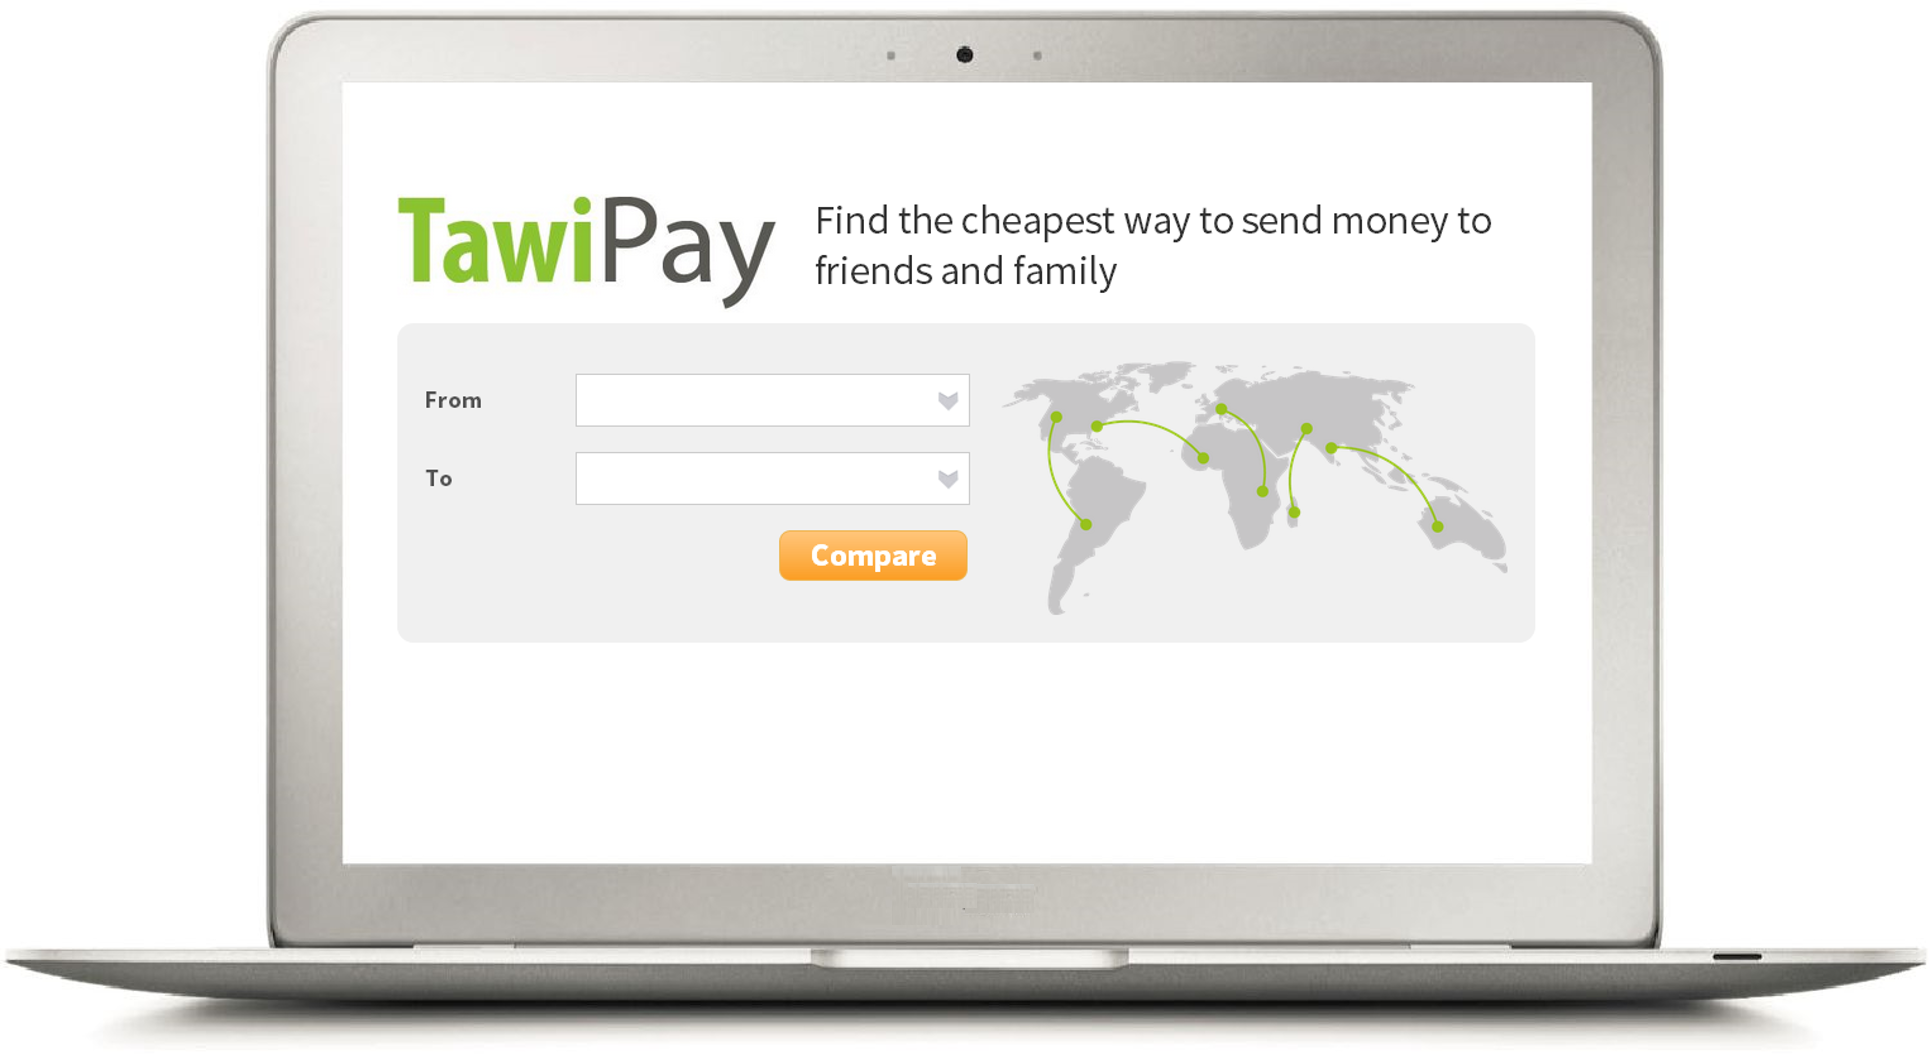 TawiPay.com launches To Help The Diaspora Save Dramatically On Money Transfer Fees